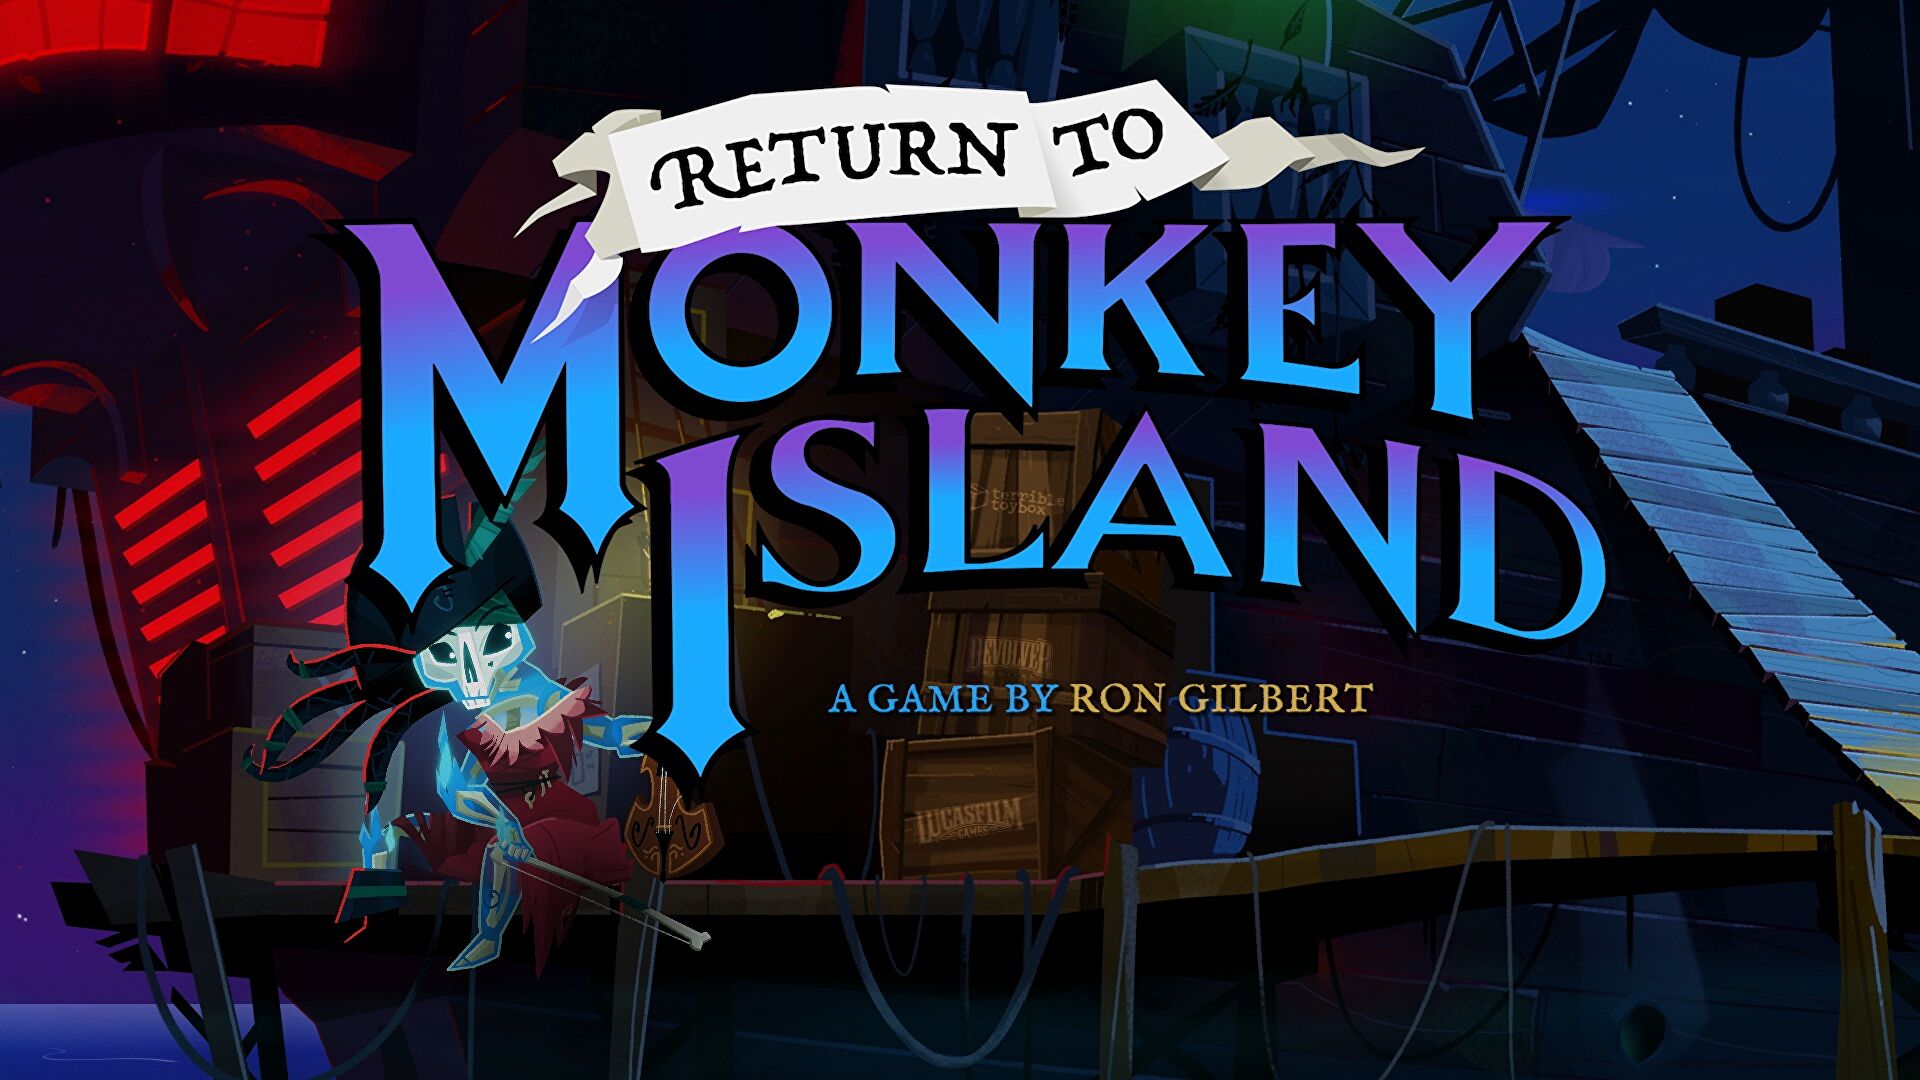 Ron Gilbert is making the Monkey Island he wants, not the one you're expecting